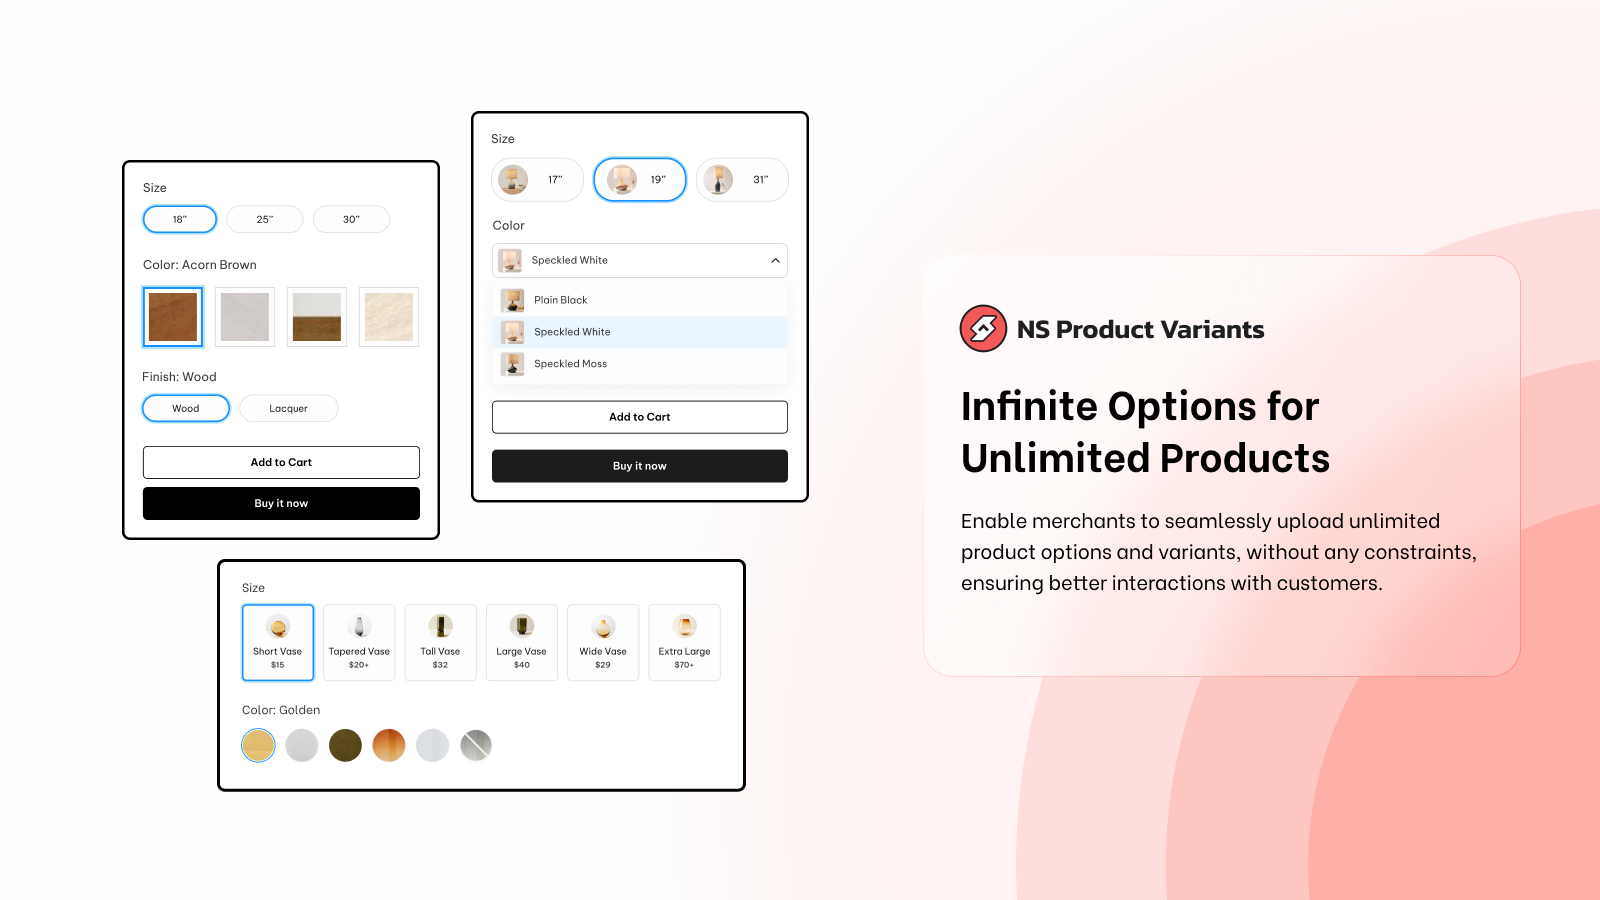 Infinite options for unlimited products